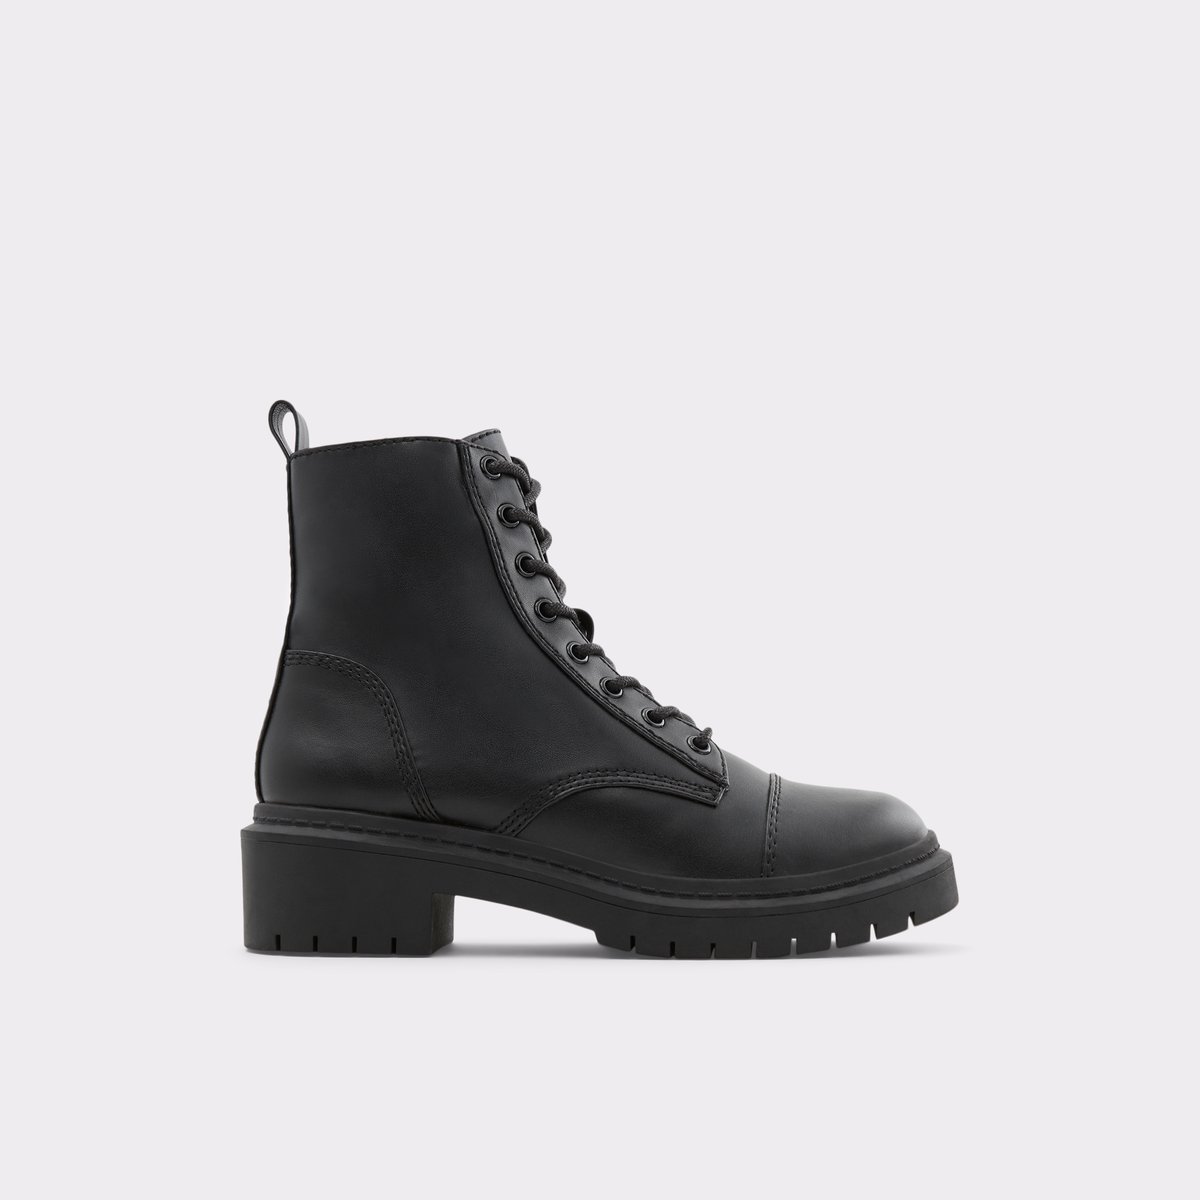 Goer Black Synthetic Smooth Women's Winter & Snow Boots | ALDO Canada